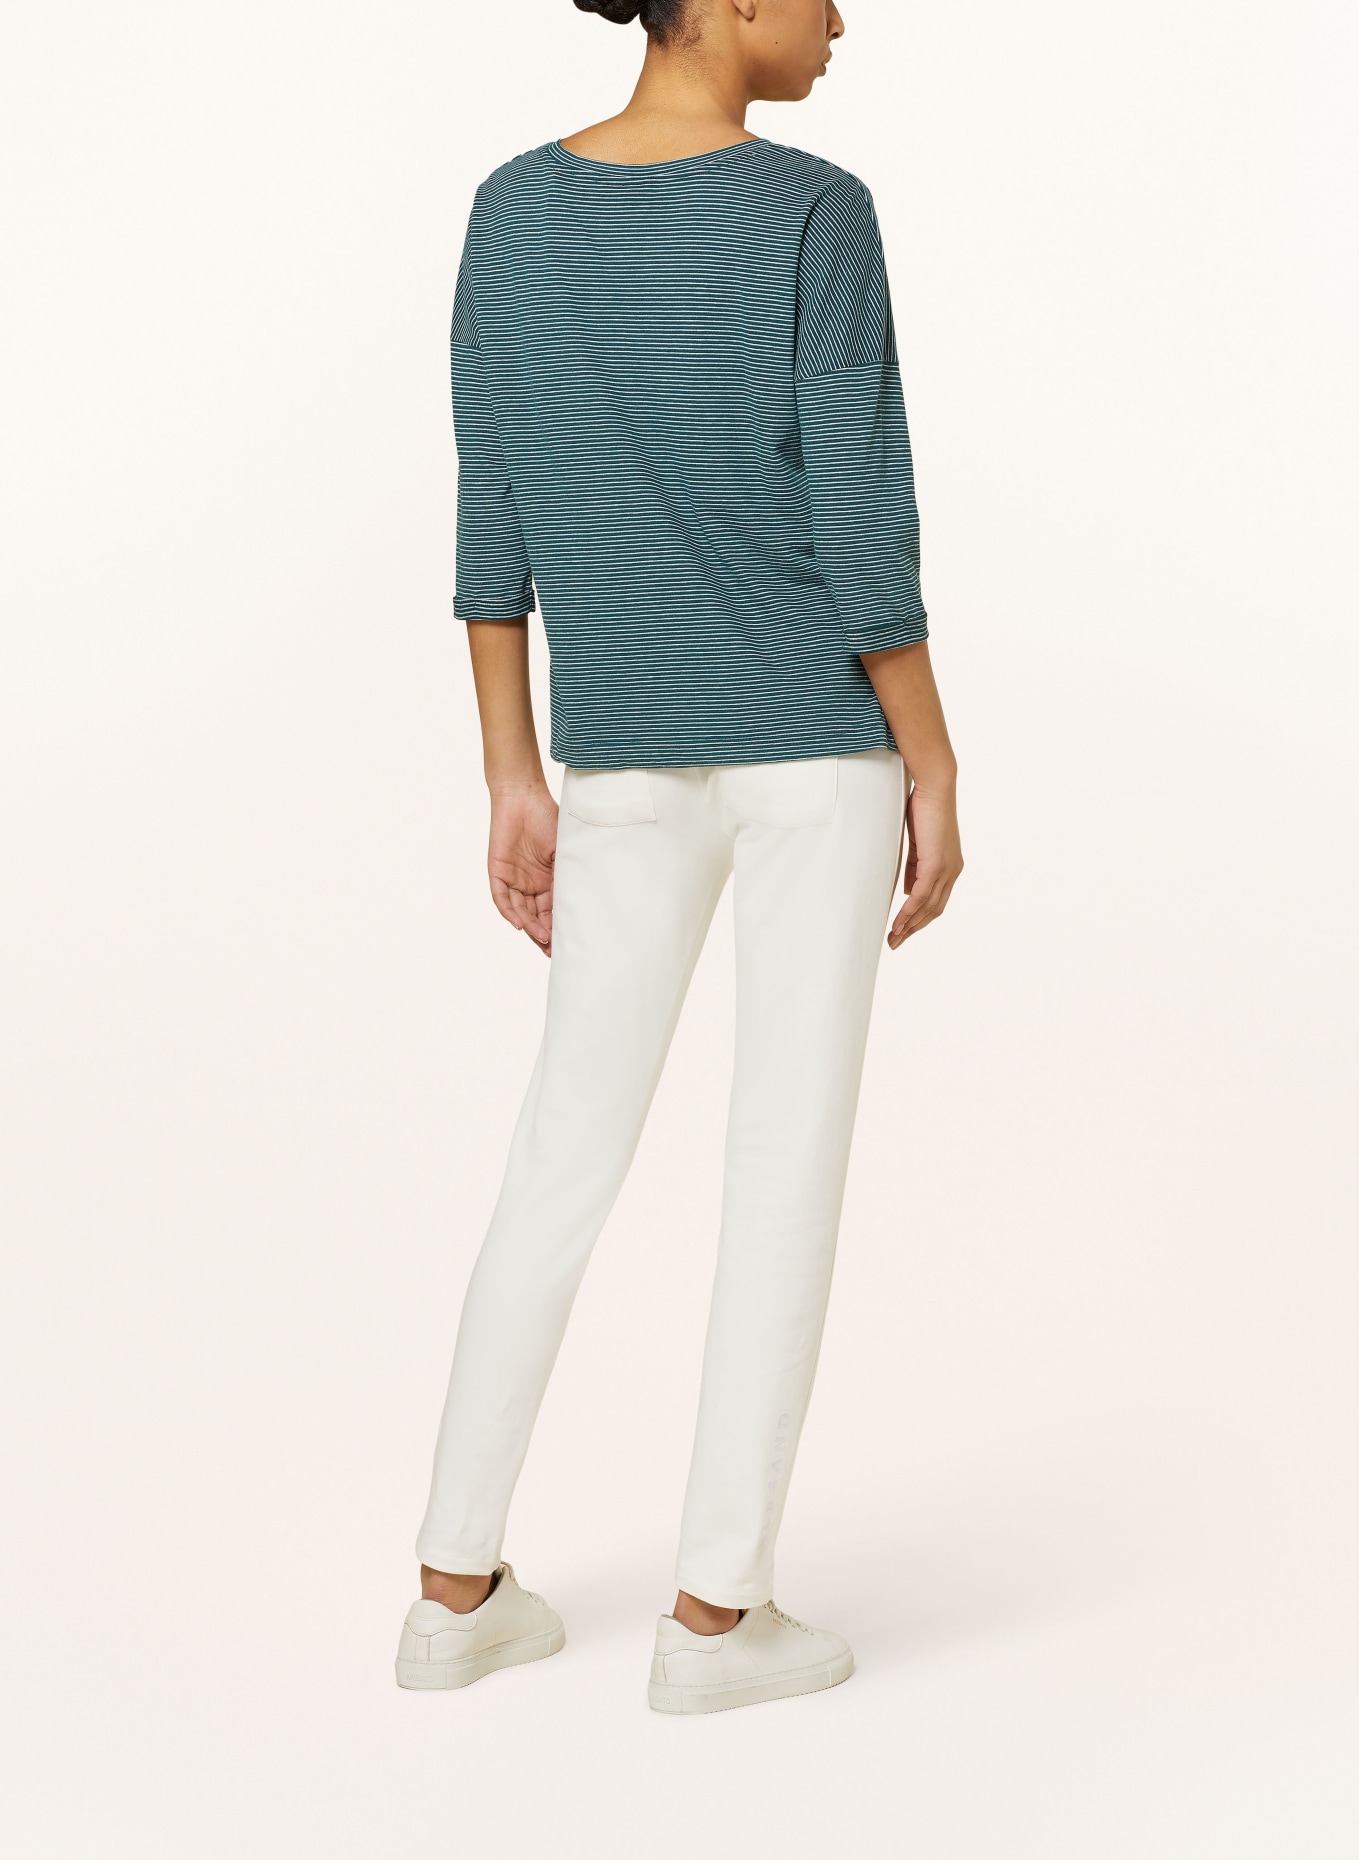 ELBSAND Shirt VEERA with 3/4 sleeves, Color: TEAL/ WHITE (Image 3)